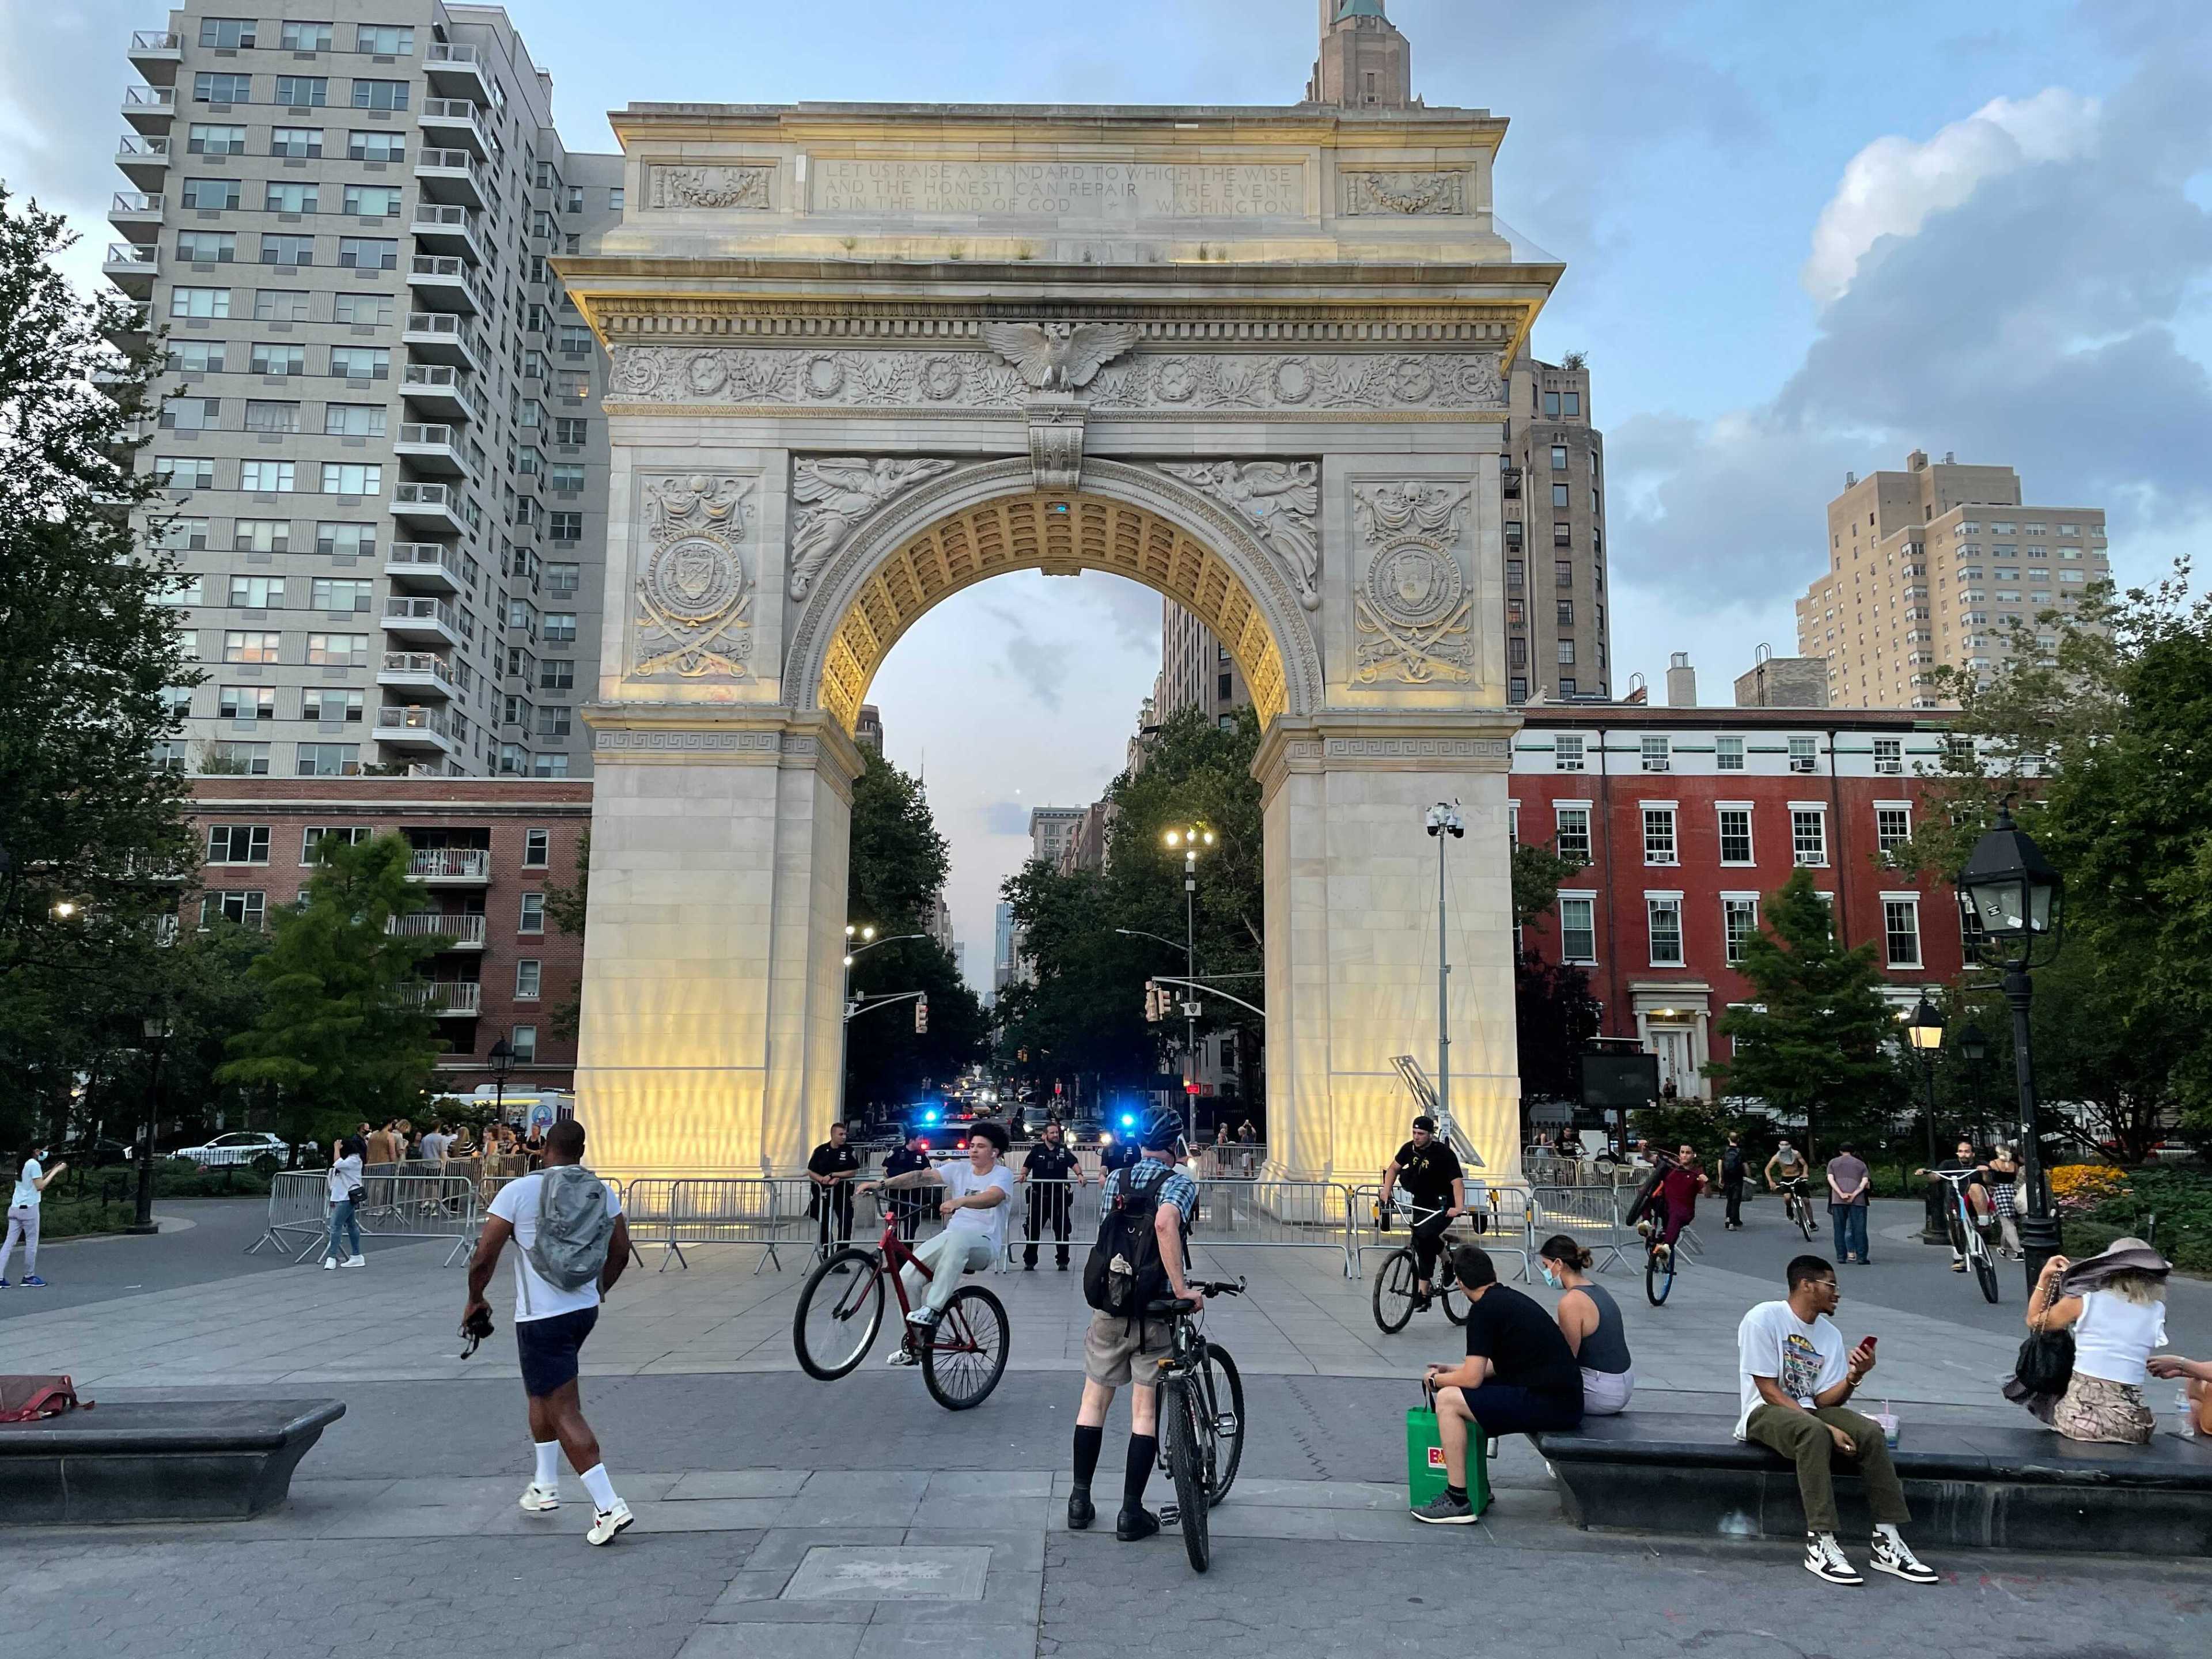 Washington Square Park on Wednesday night, looking at the arch as people mill around it and the cops watch over it.